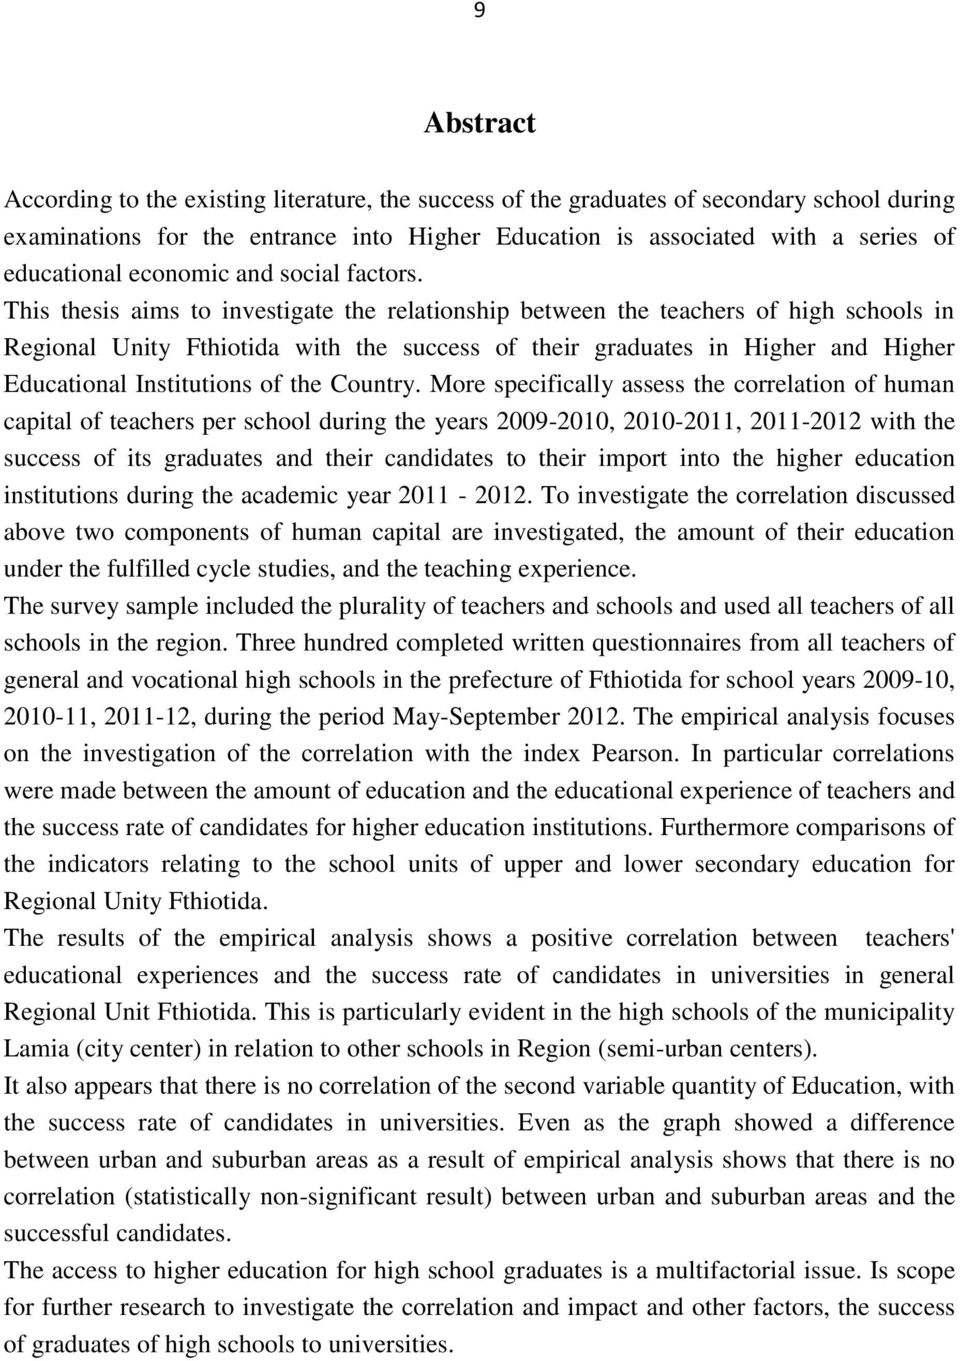 This thesis aims to investigate the relationship between the teachers of high schools in Regional Unity Fthiotida with the success of their graduates in Higher and Higher Educational Institutions of